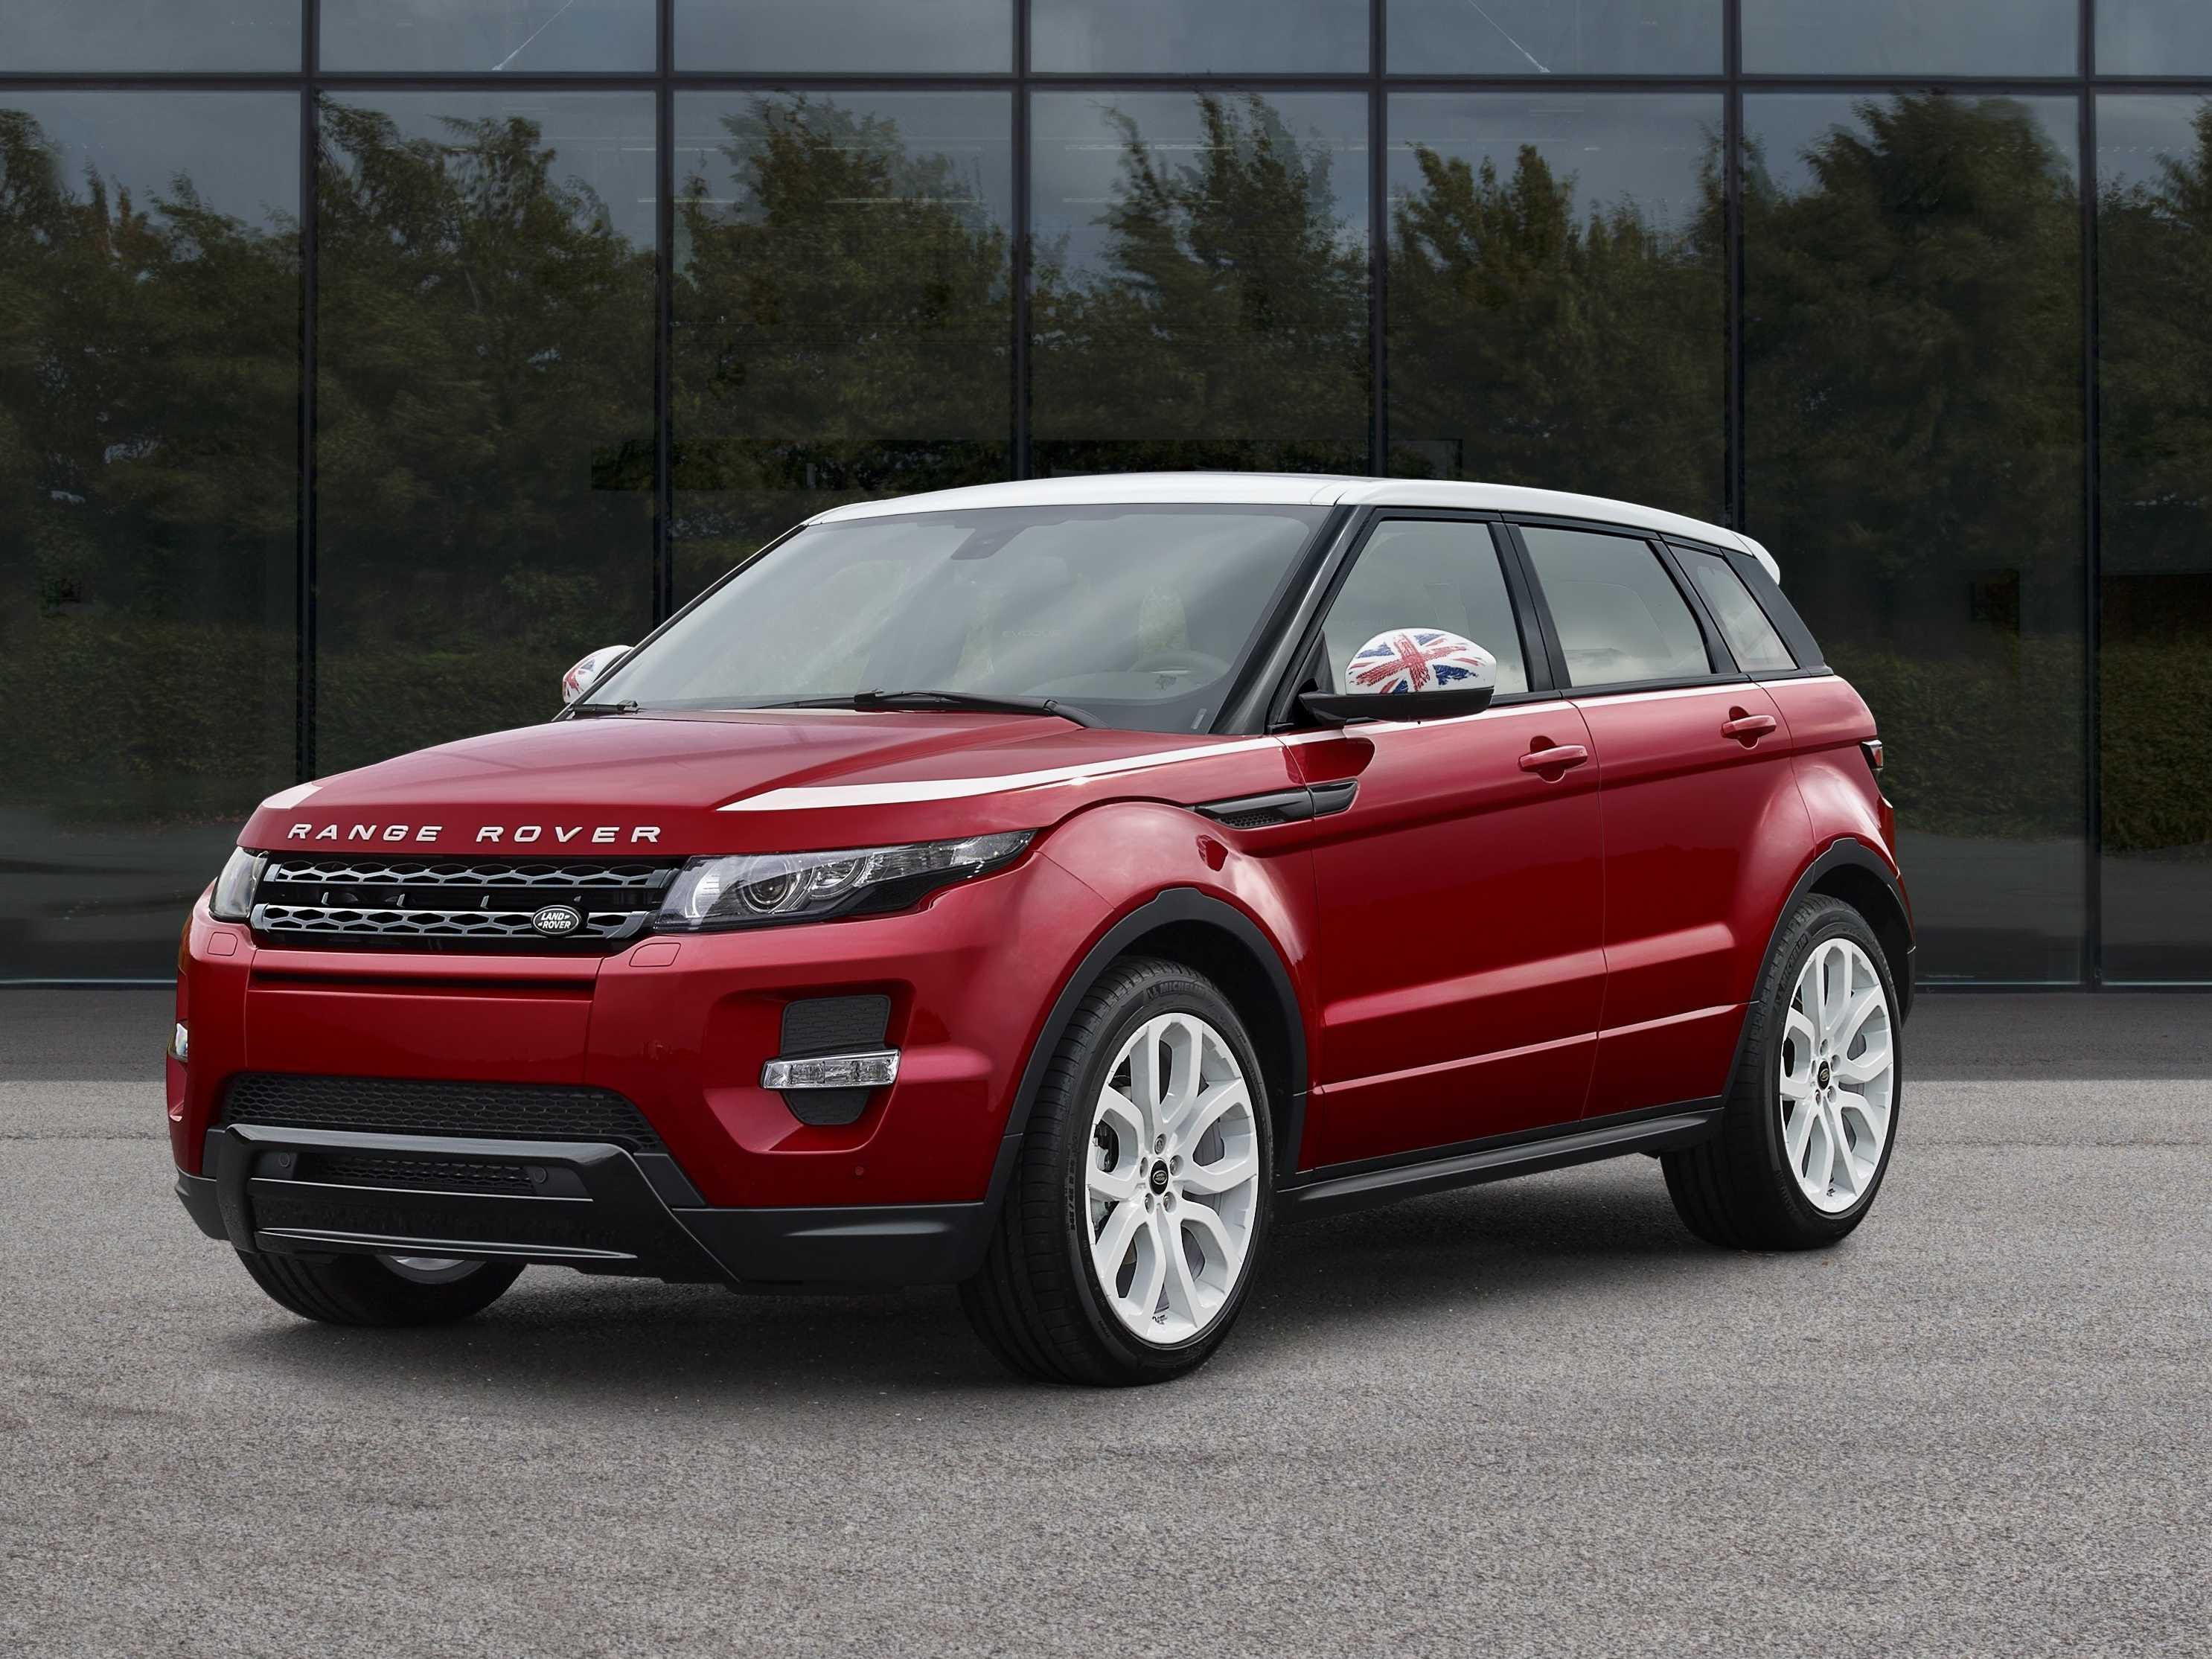 Land Rover Range Rover Evoque Convertible best specifications